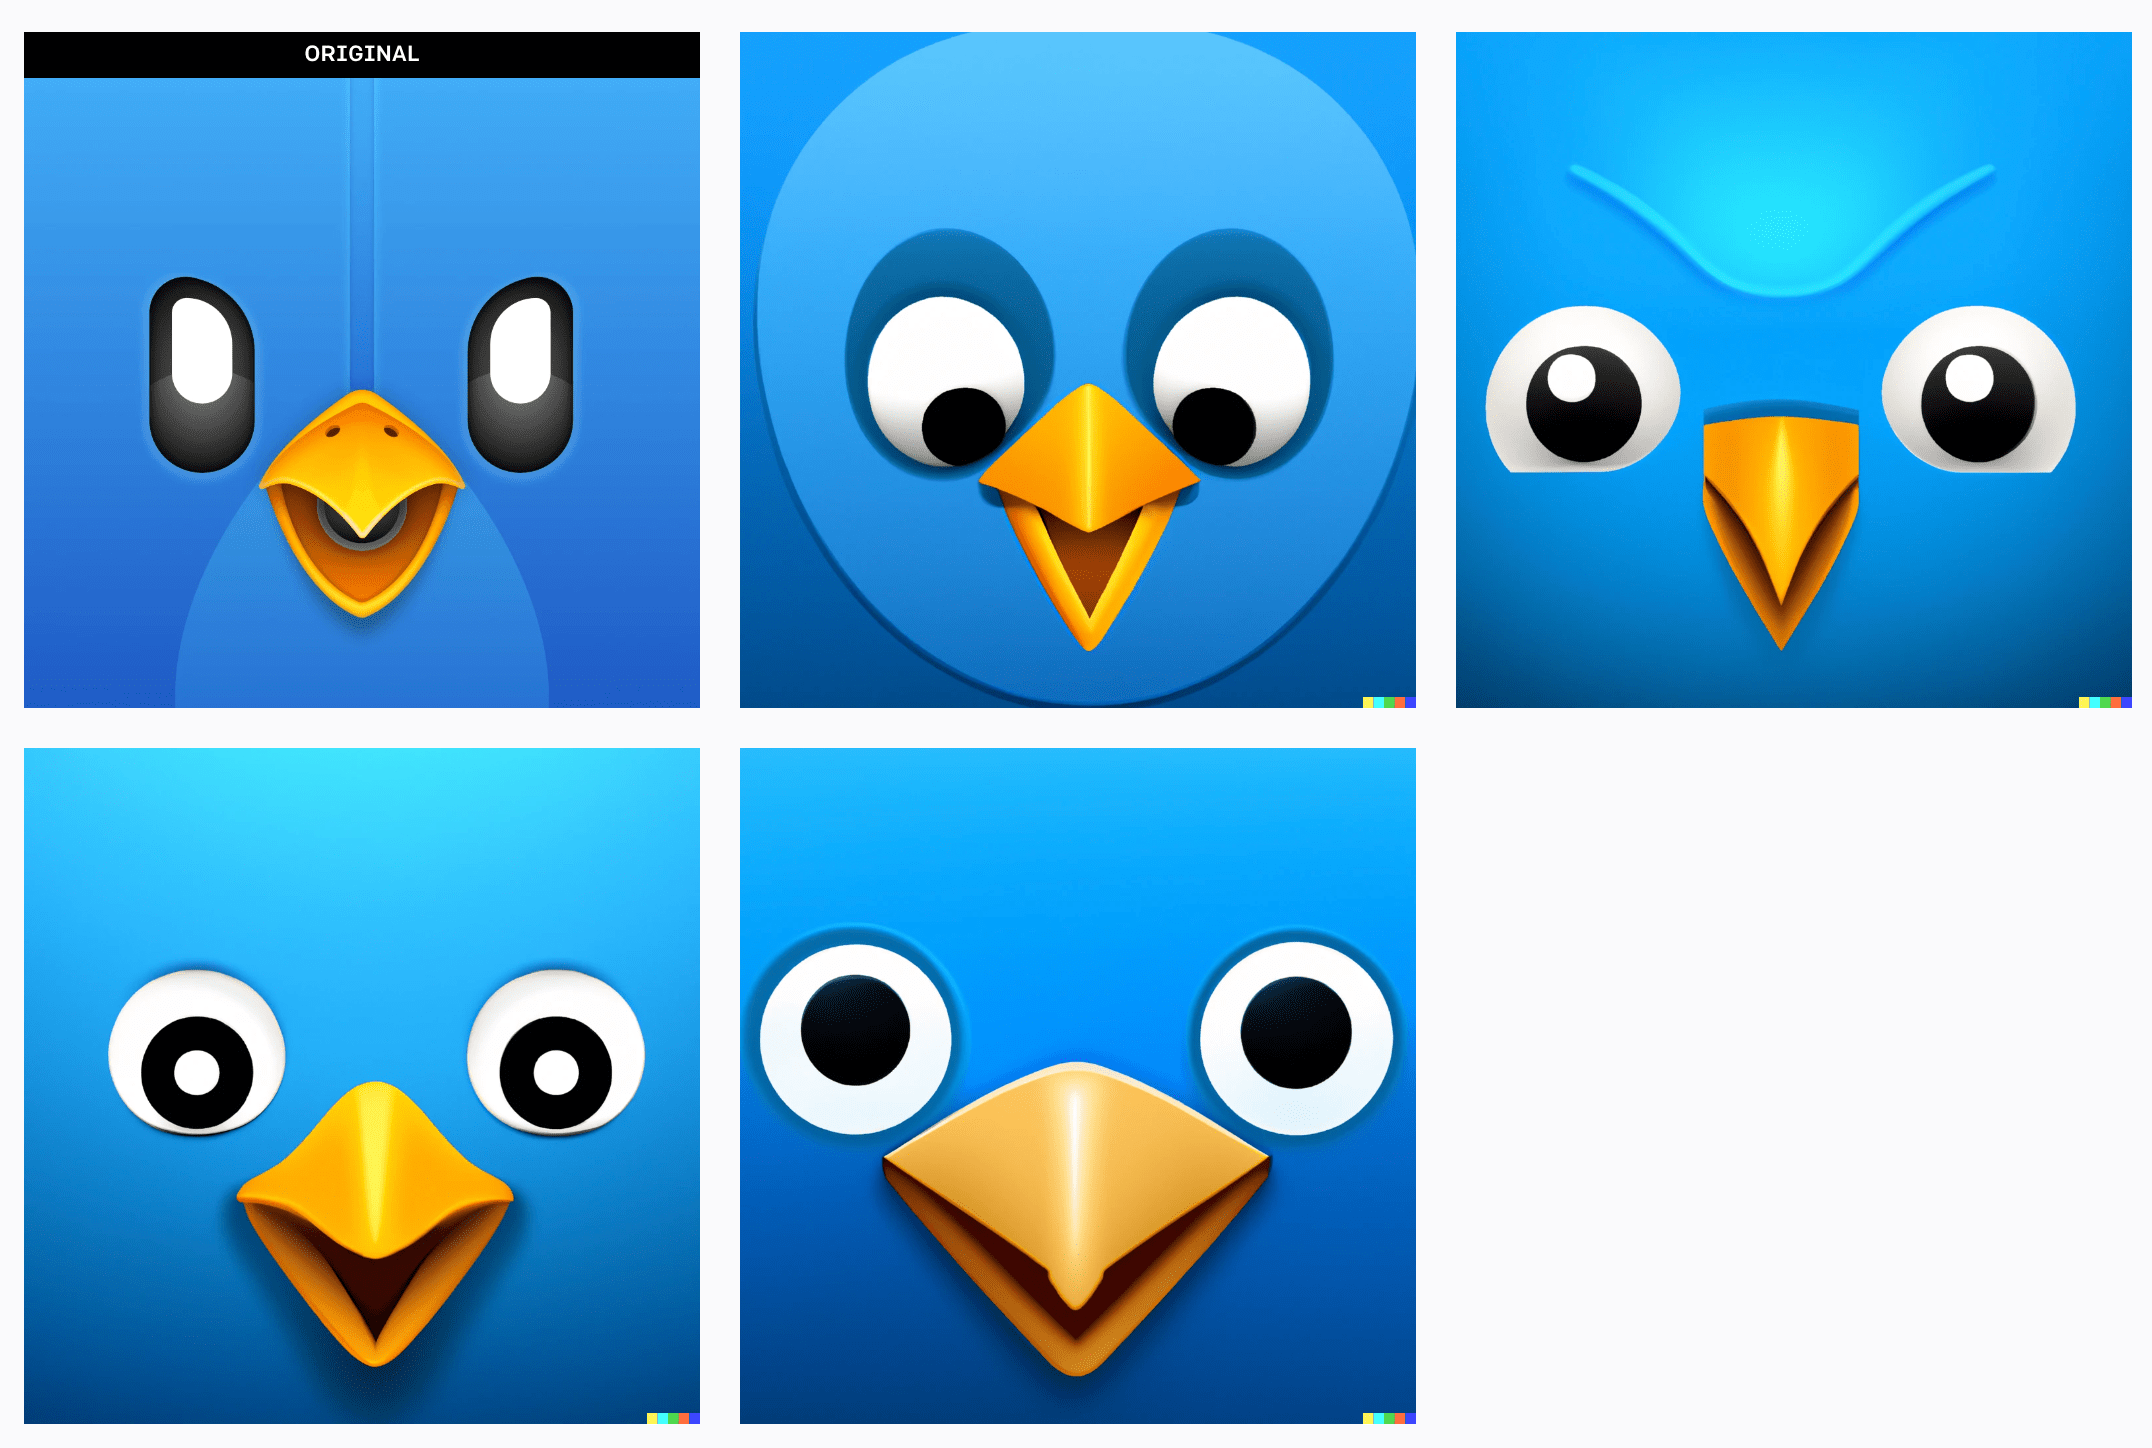 The original “Tweetbot 5” app icon with 4 AI-generated variations alongside it.